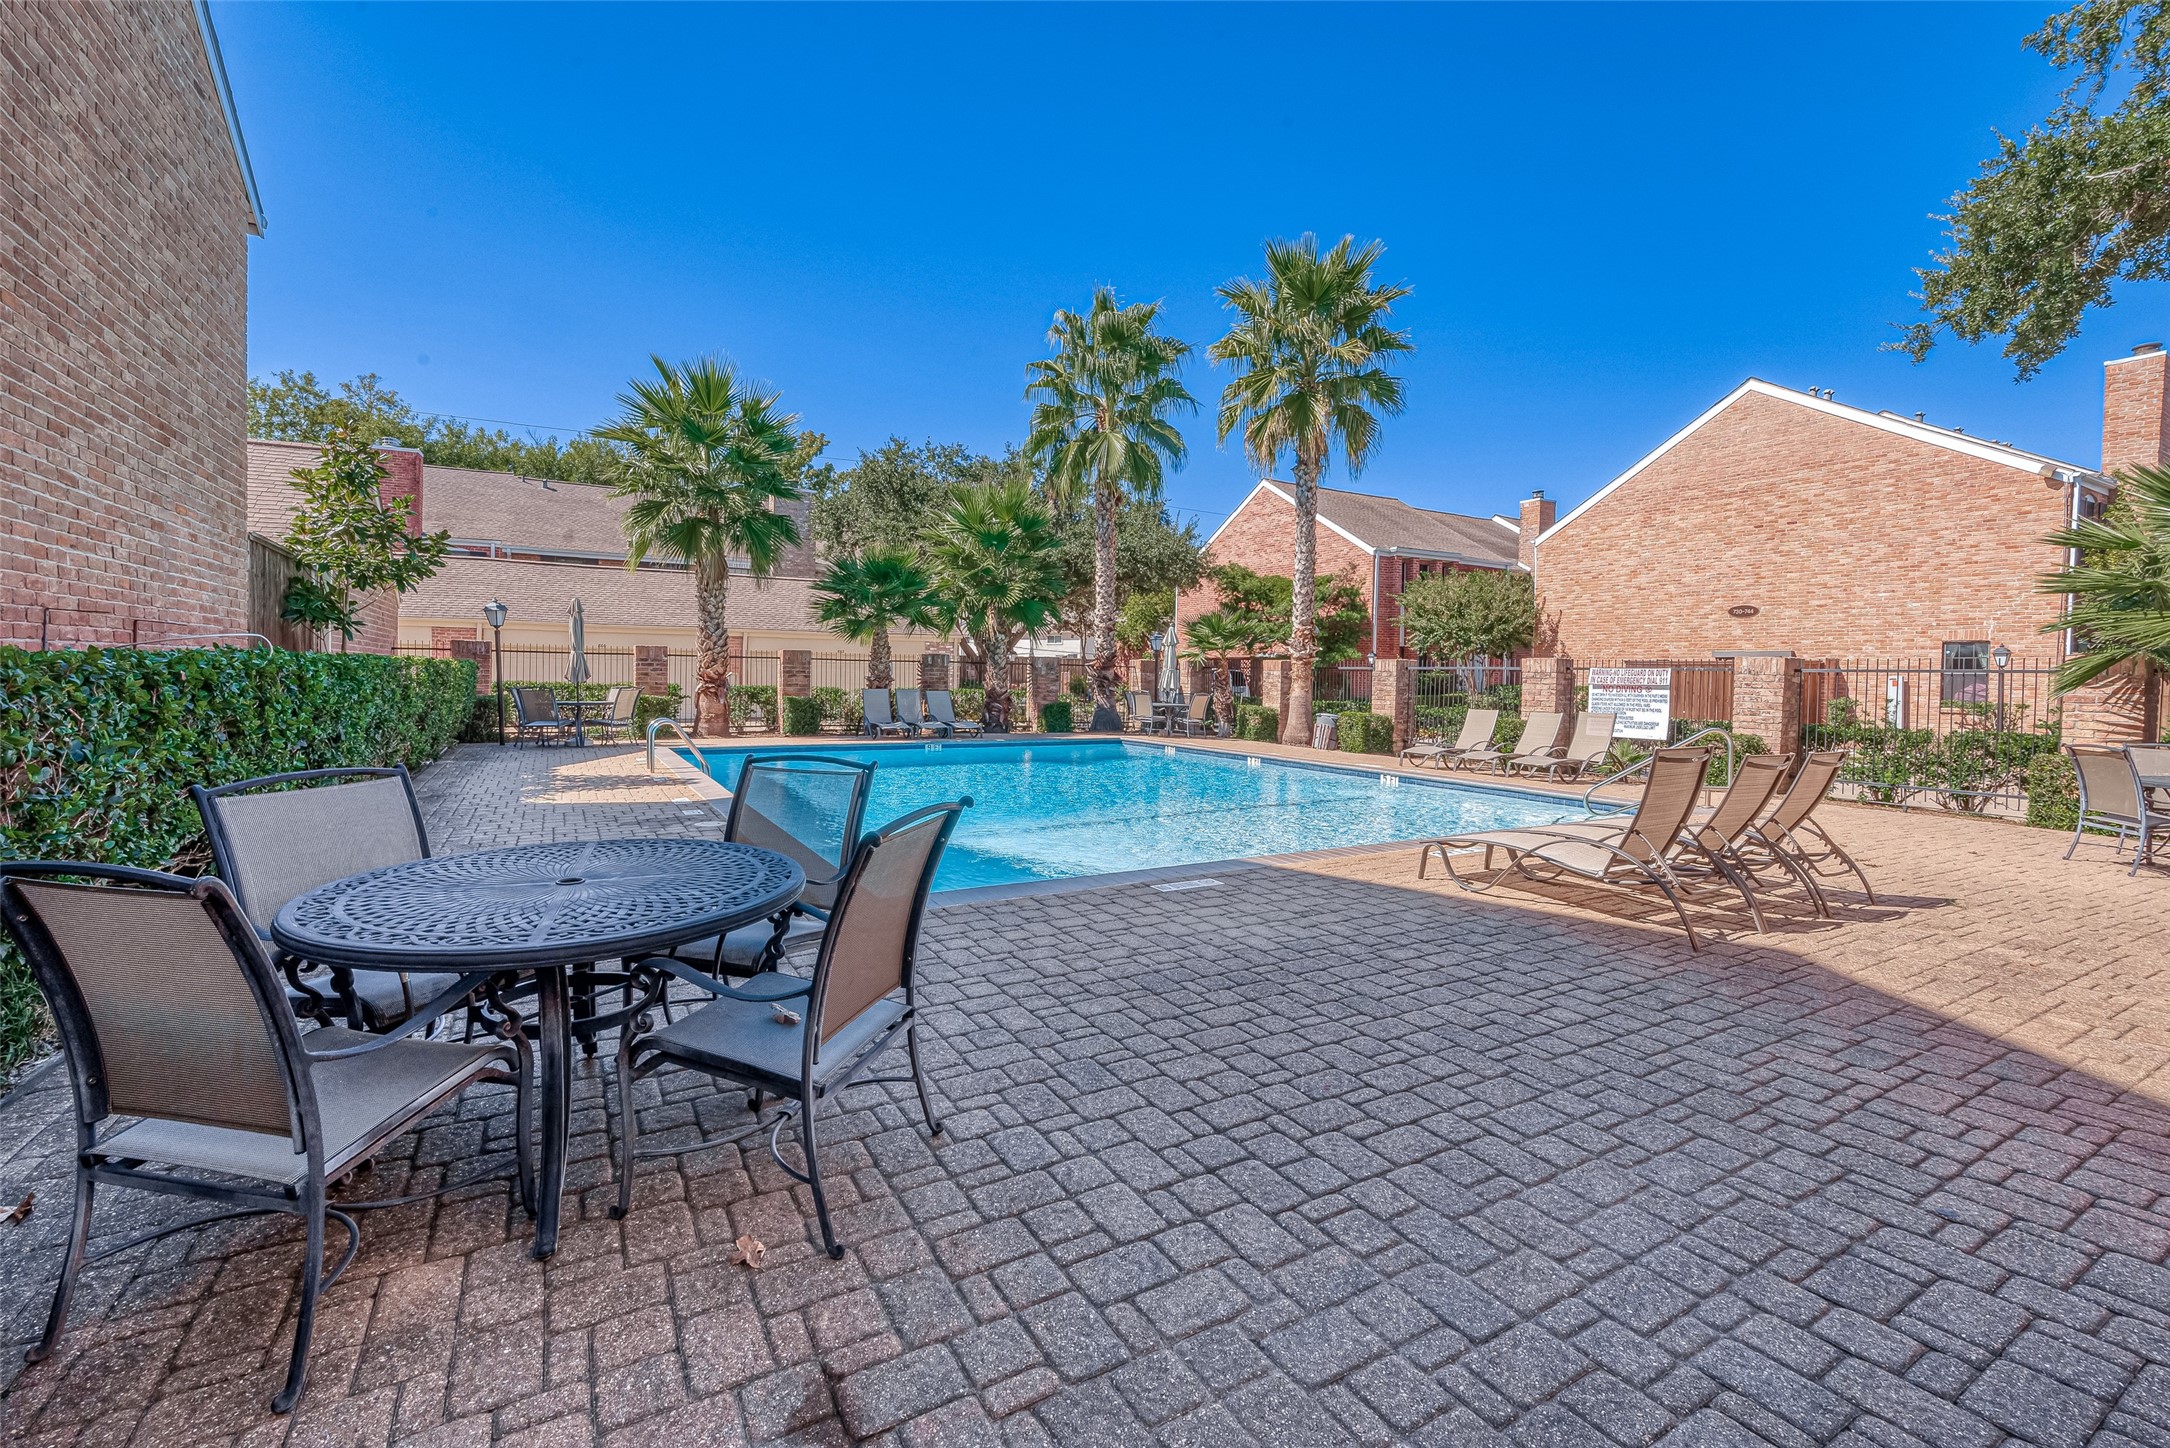 One of two beautiful pools for hot summer days! There is also access to two tennis courts.